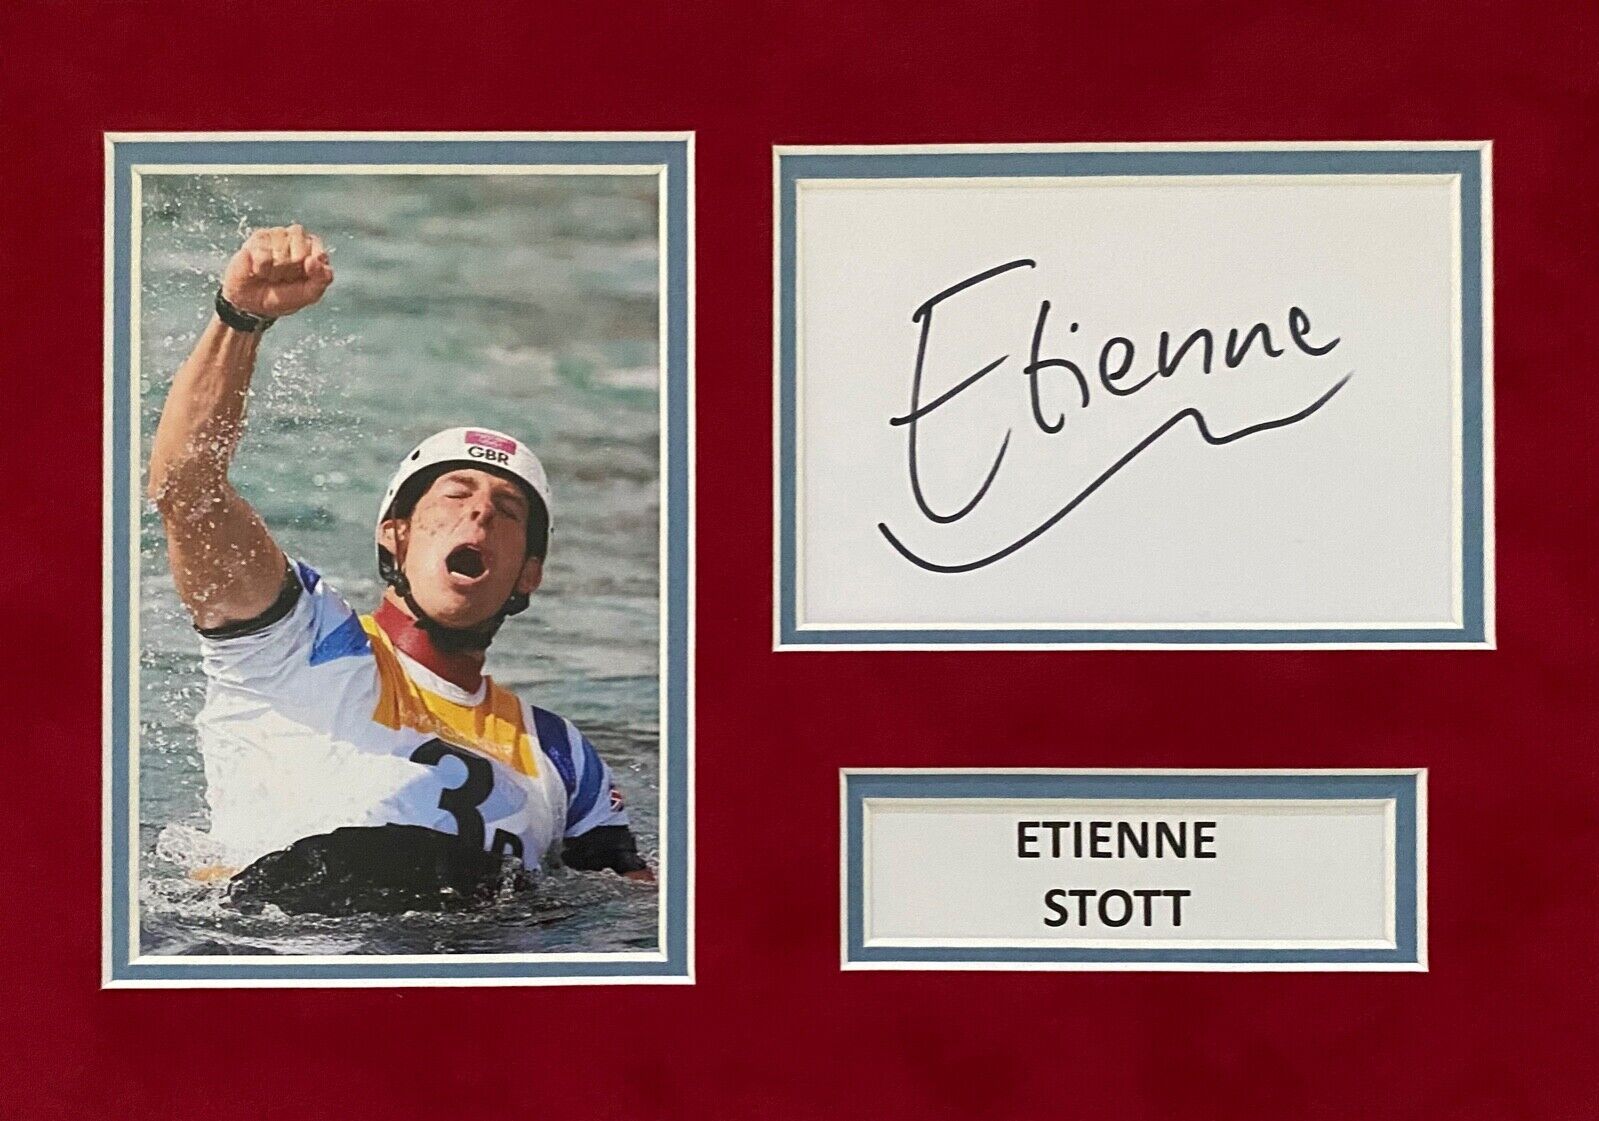 ETIENNE STOTT HAND SIGNED A4 Photo Poster painting MOUNT DISPLAY OLYMPICS AUTOGRAPH 1